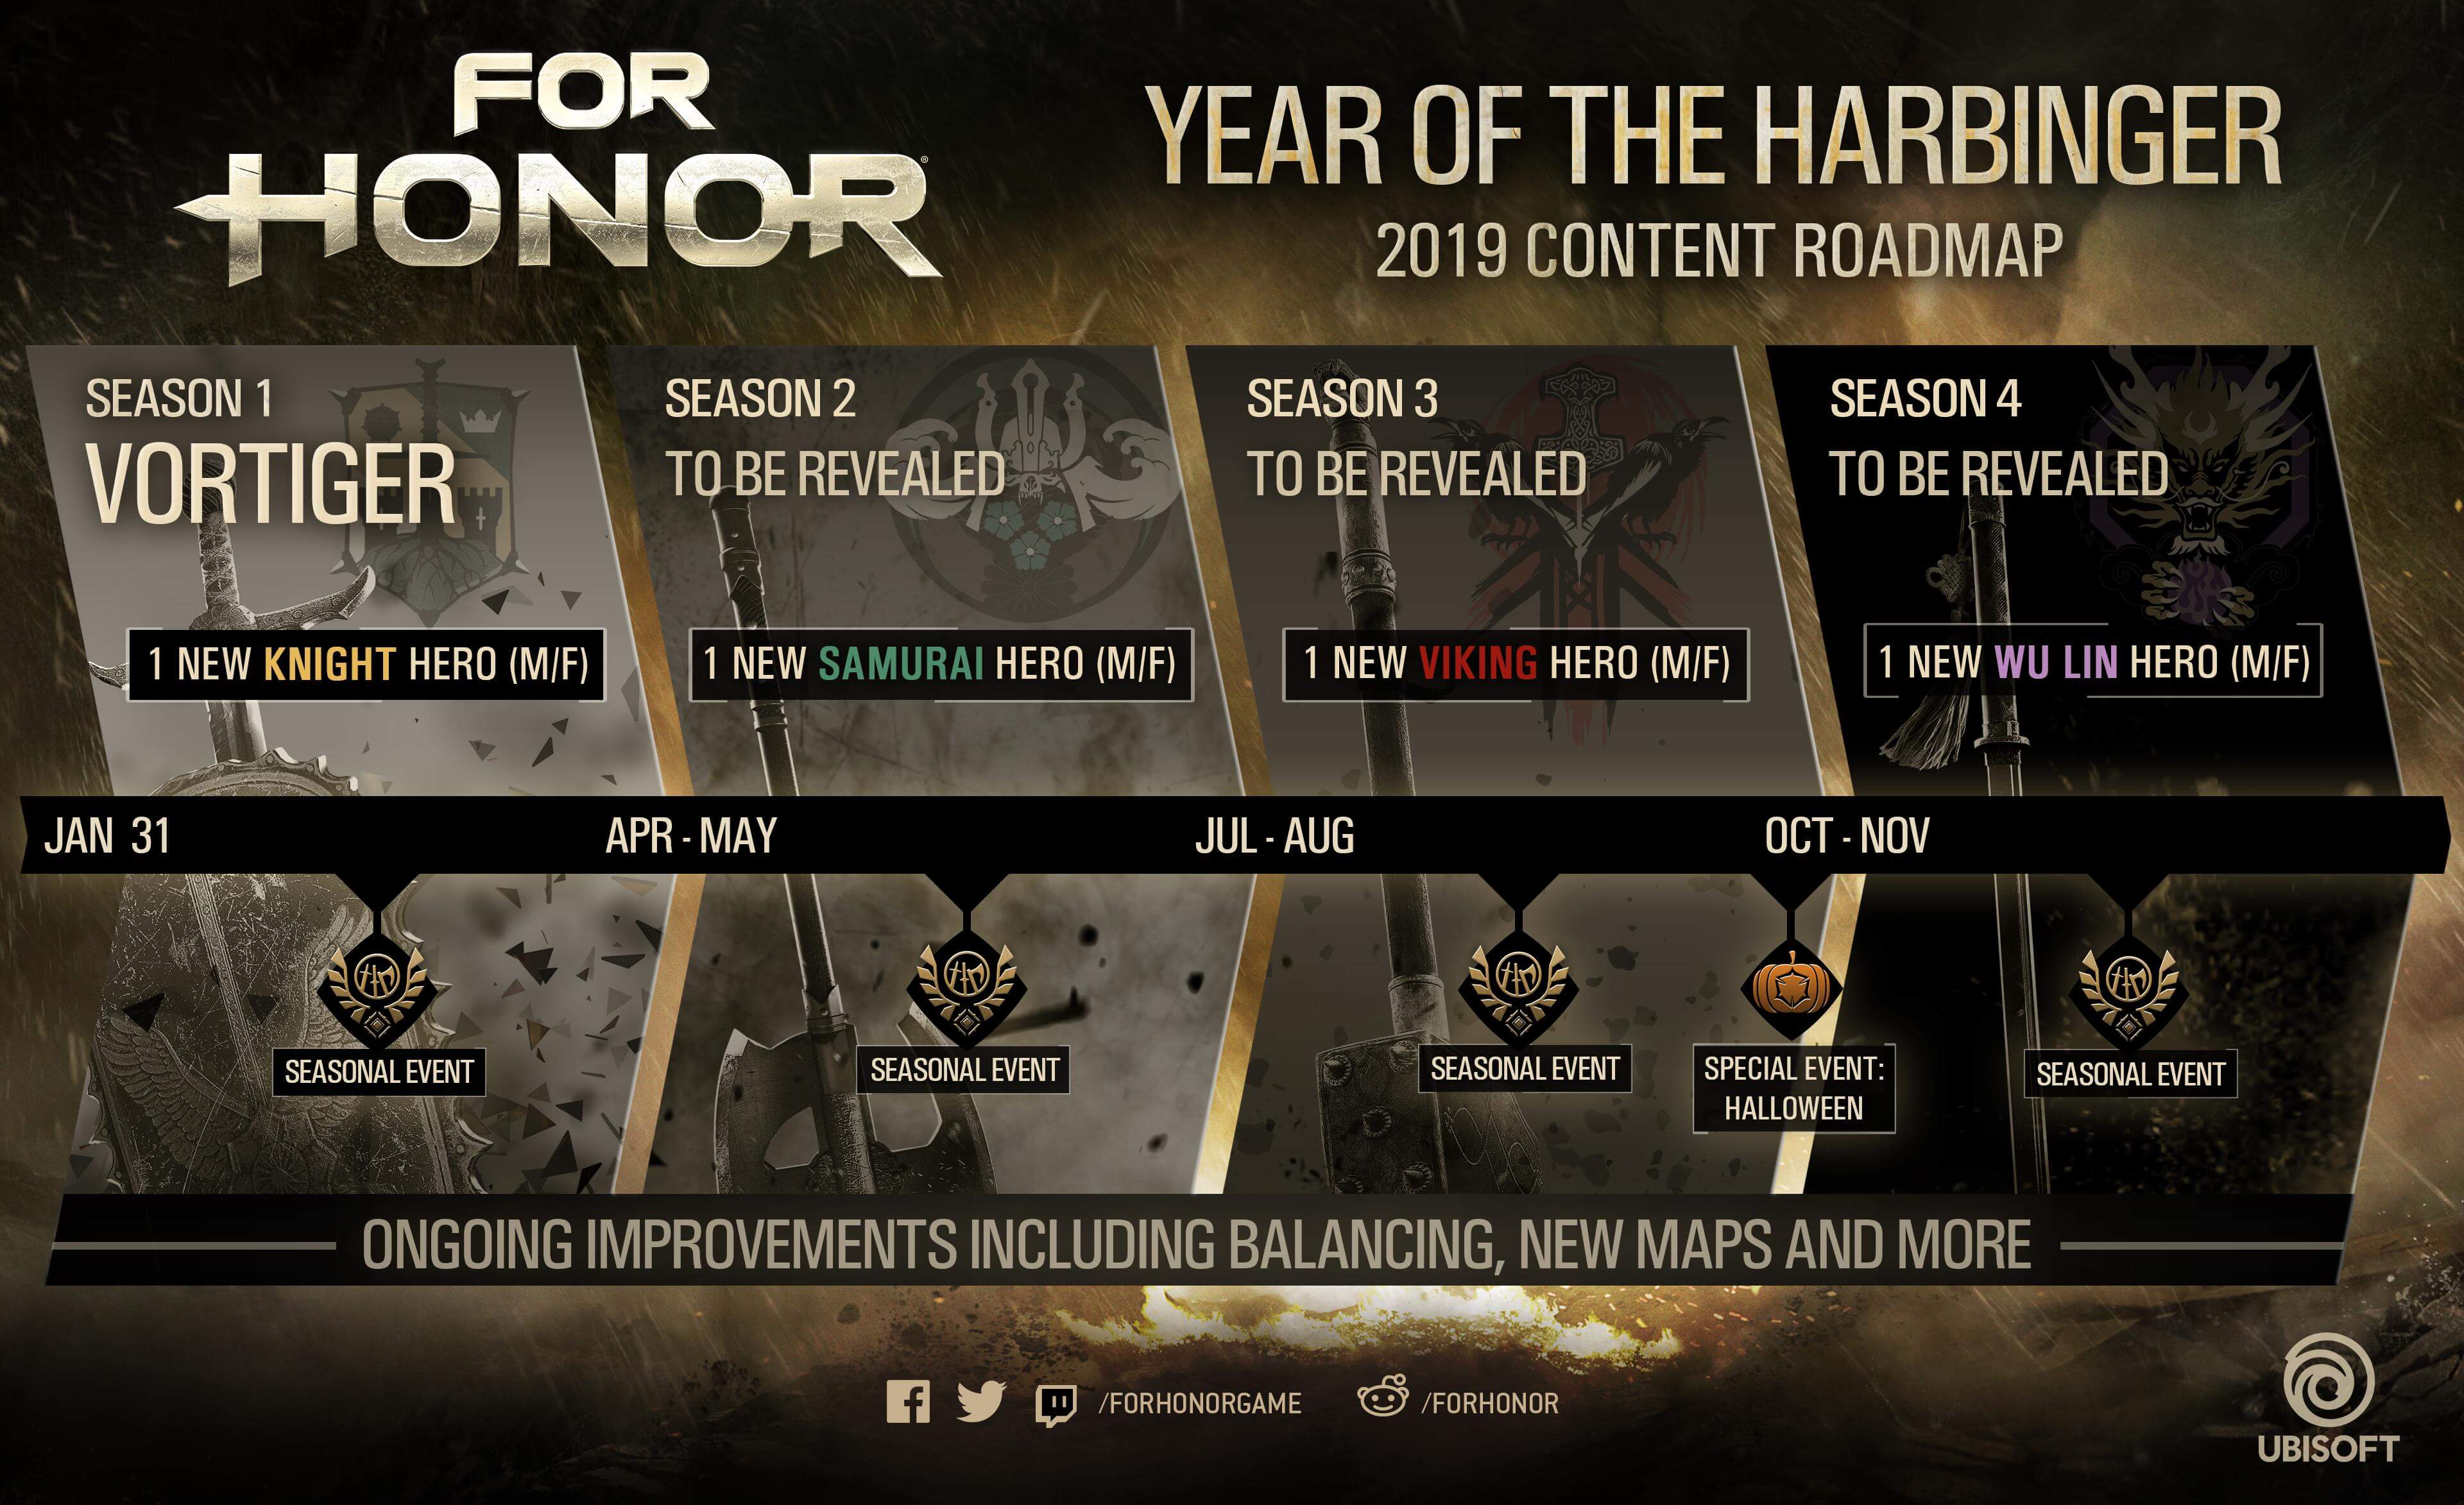 The Year of the Harbinger